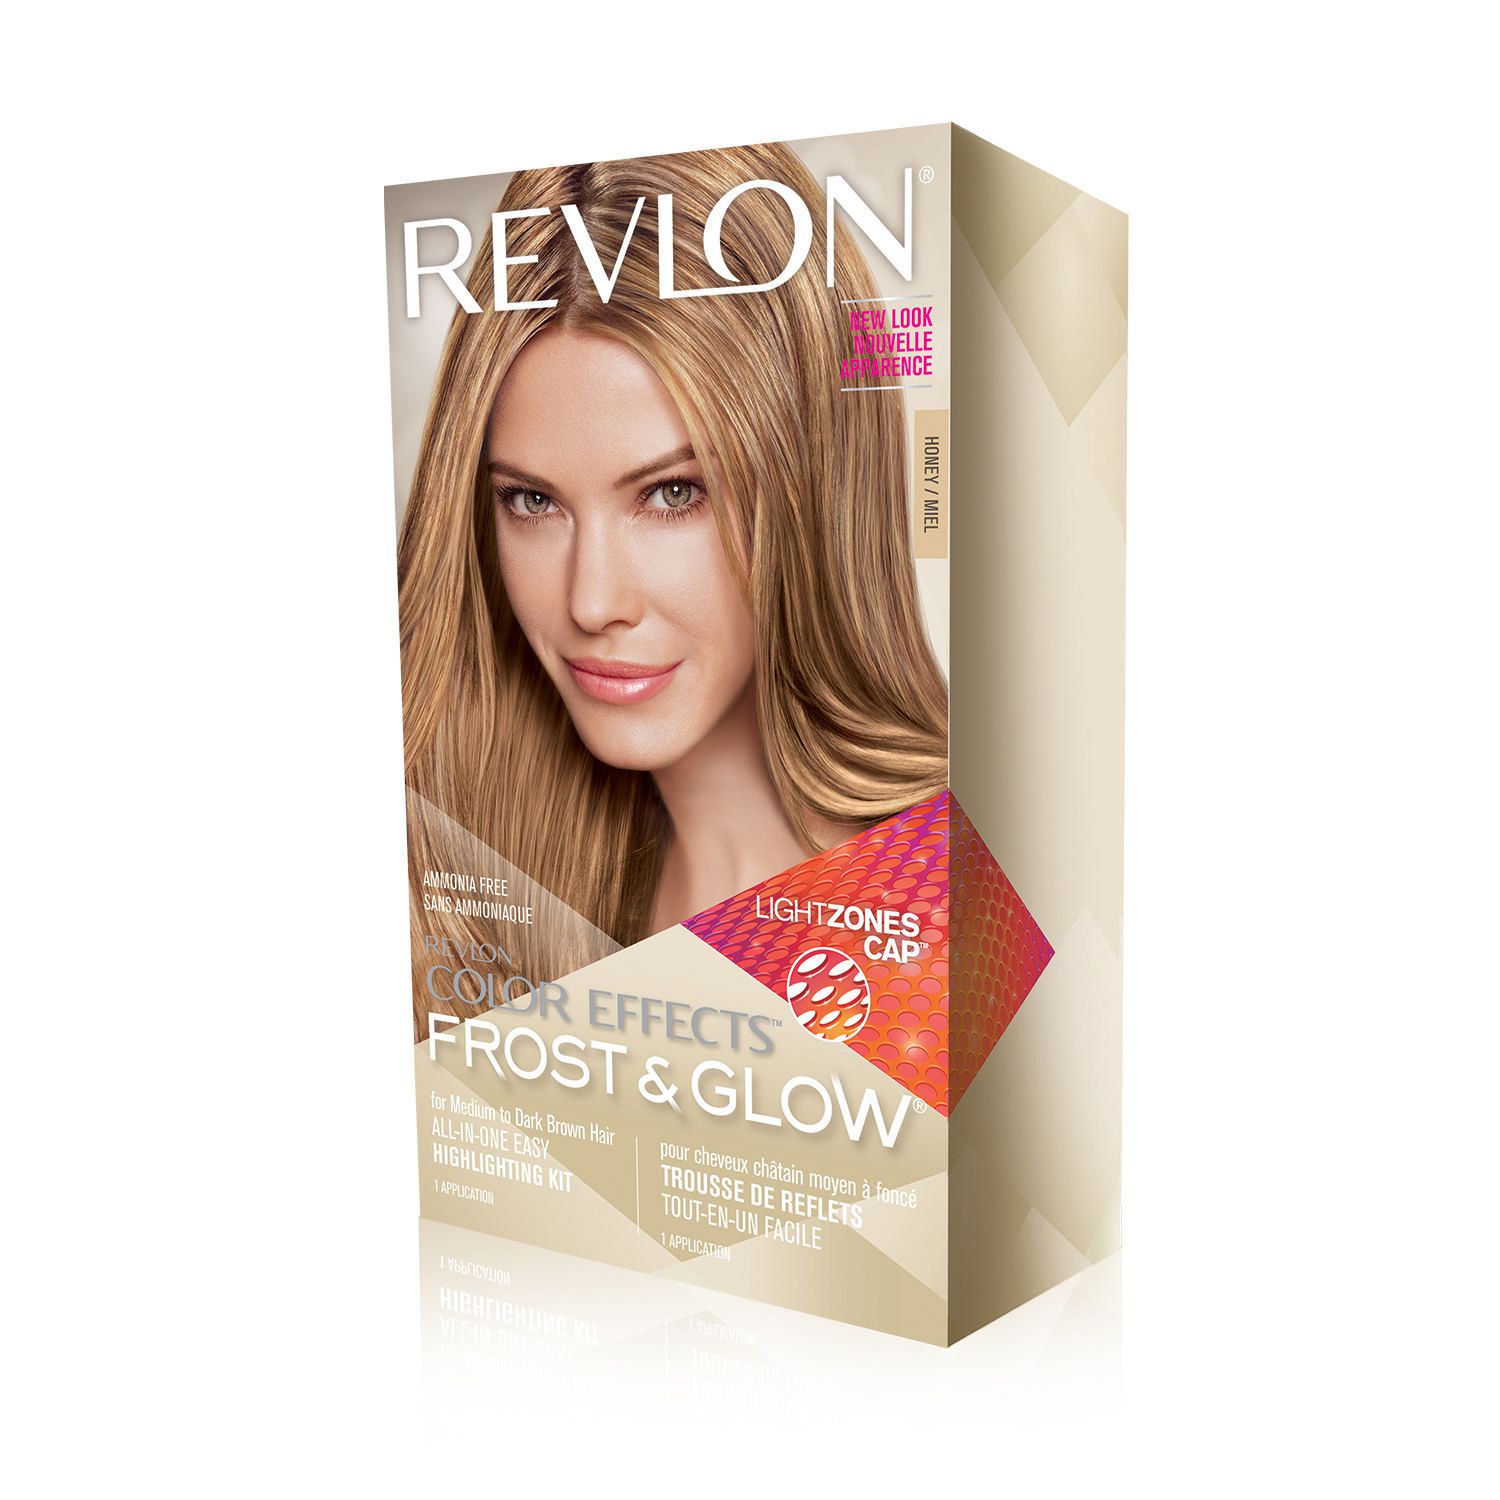 Revlon Color Effects Frost & Glow Highlighting Kit | Walmart Canada